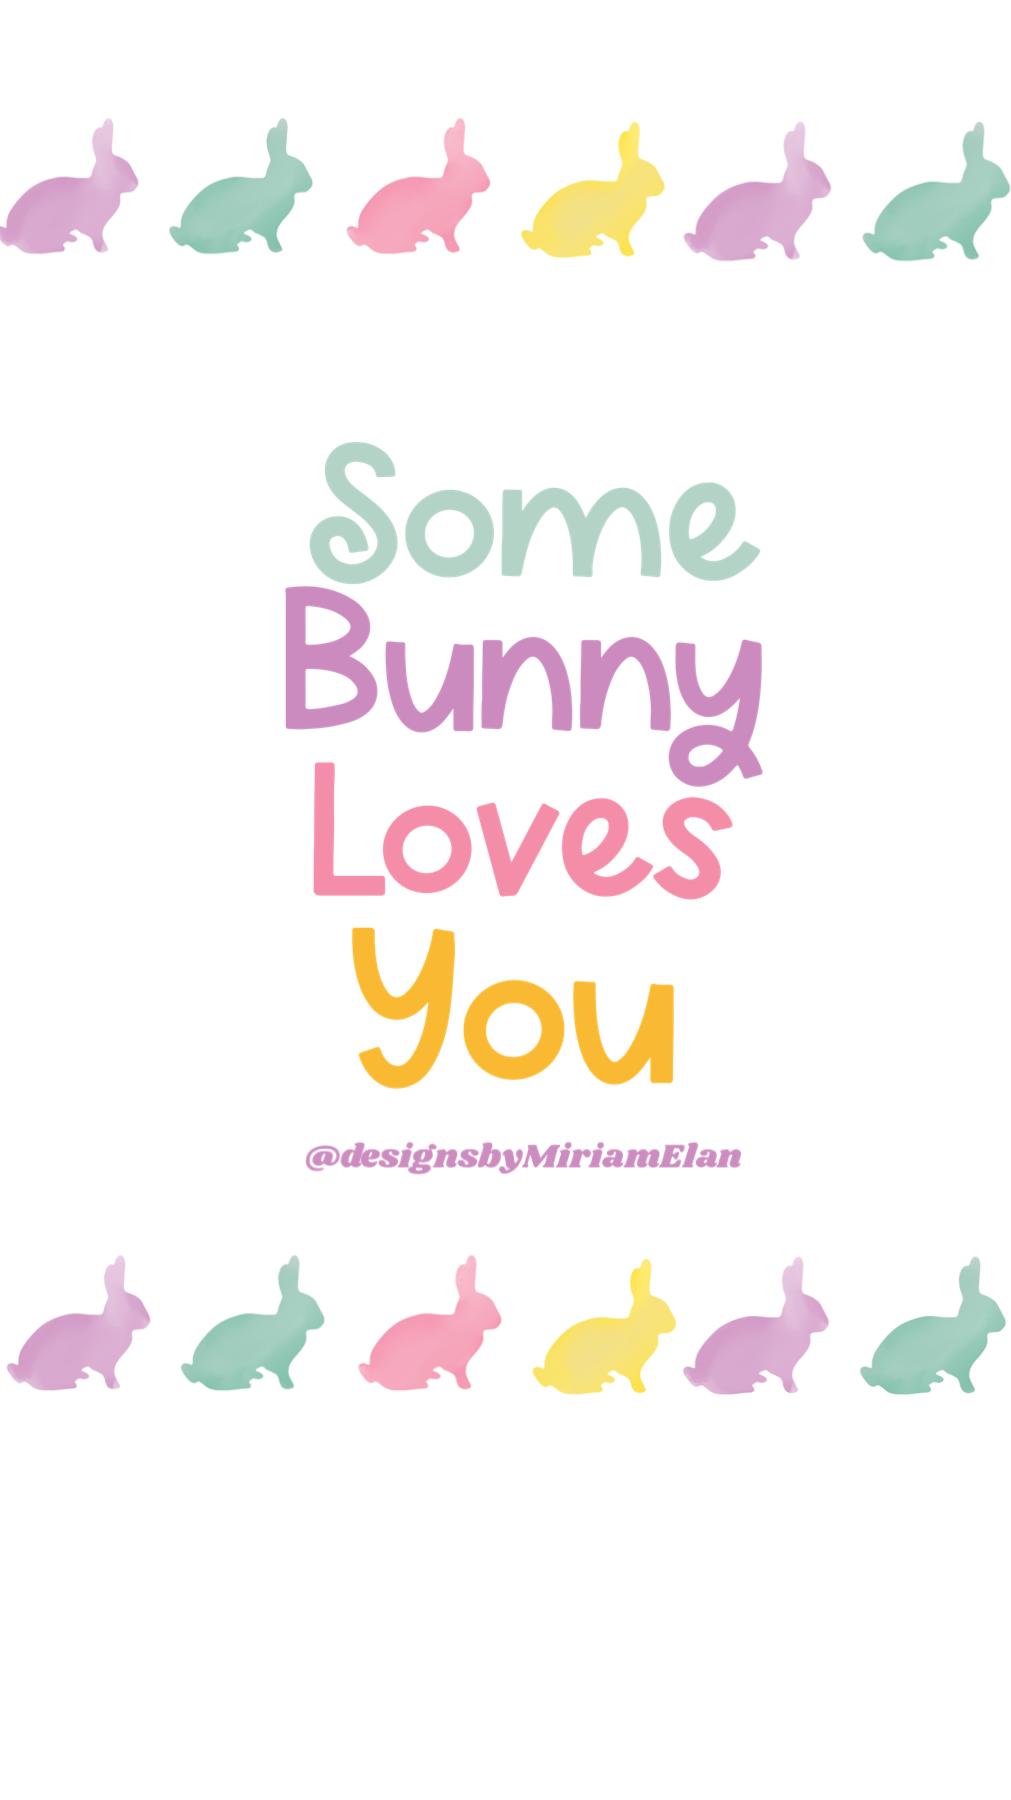 some 🐰 loves you!💖☀️🌷